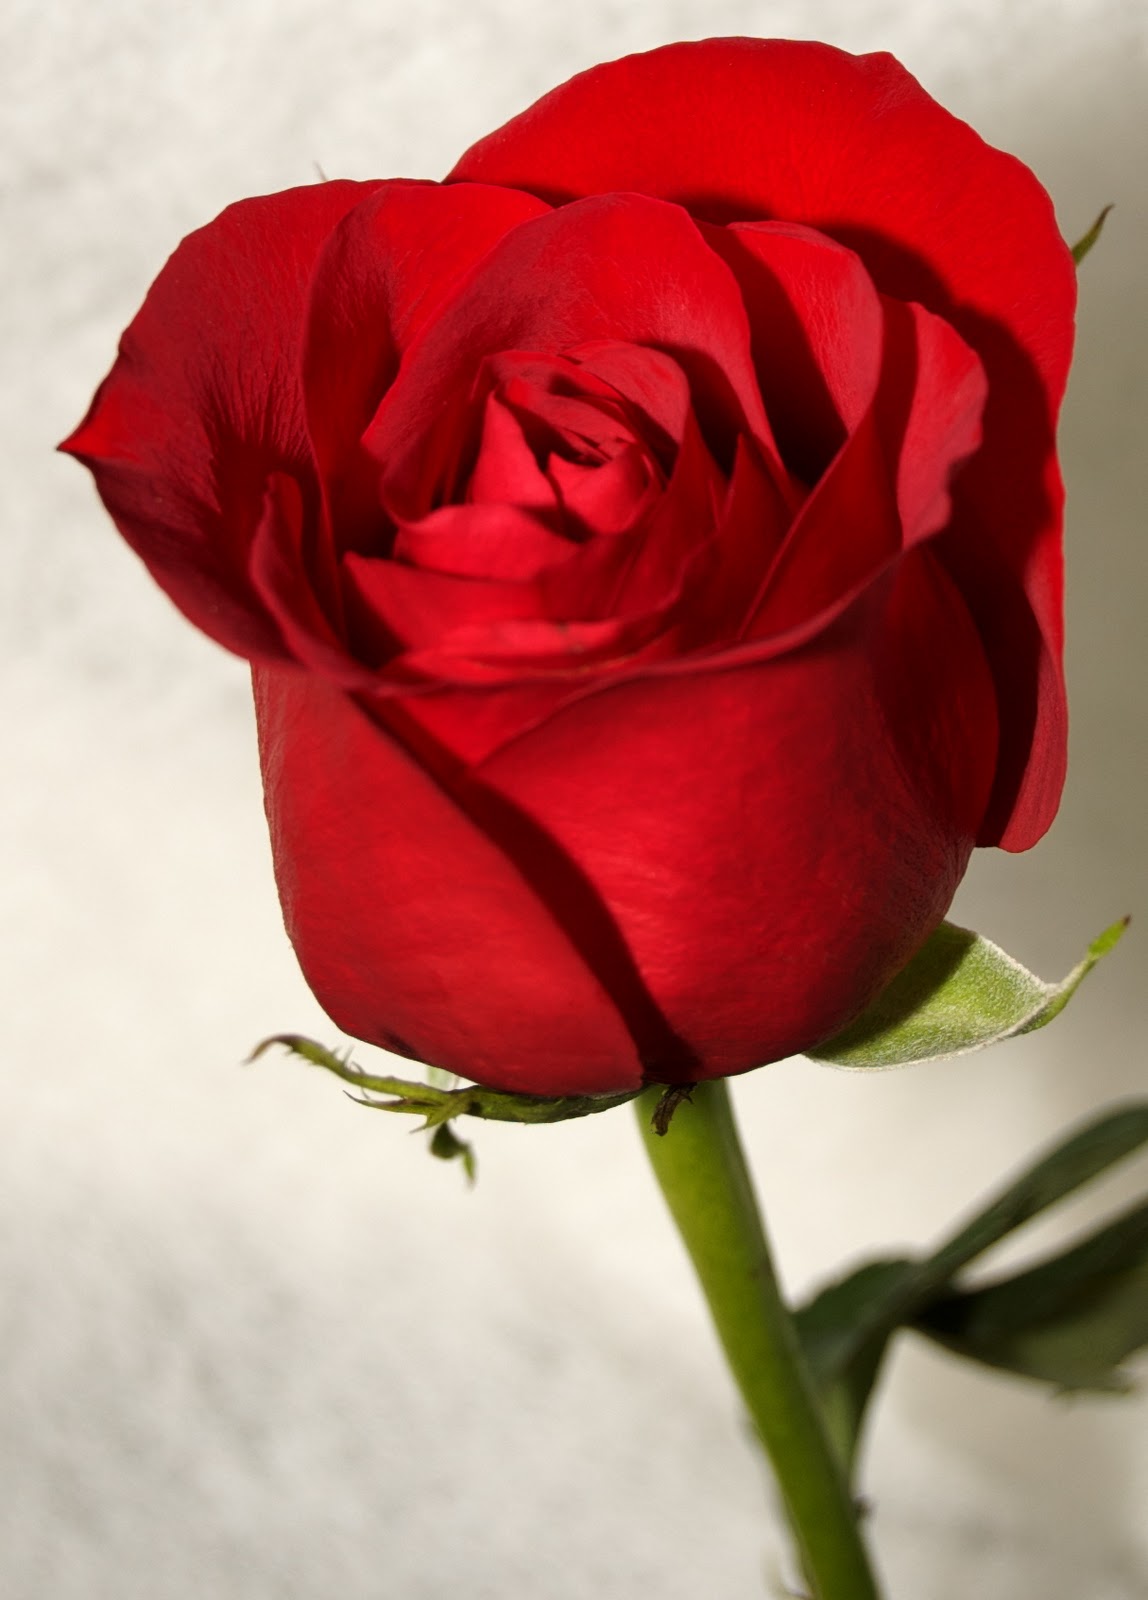 Lovely Rose Wallpaper Pictures